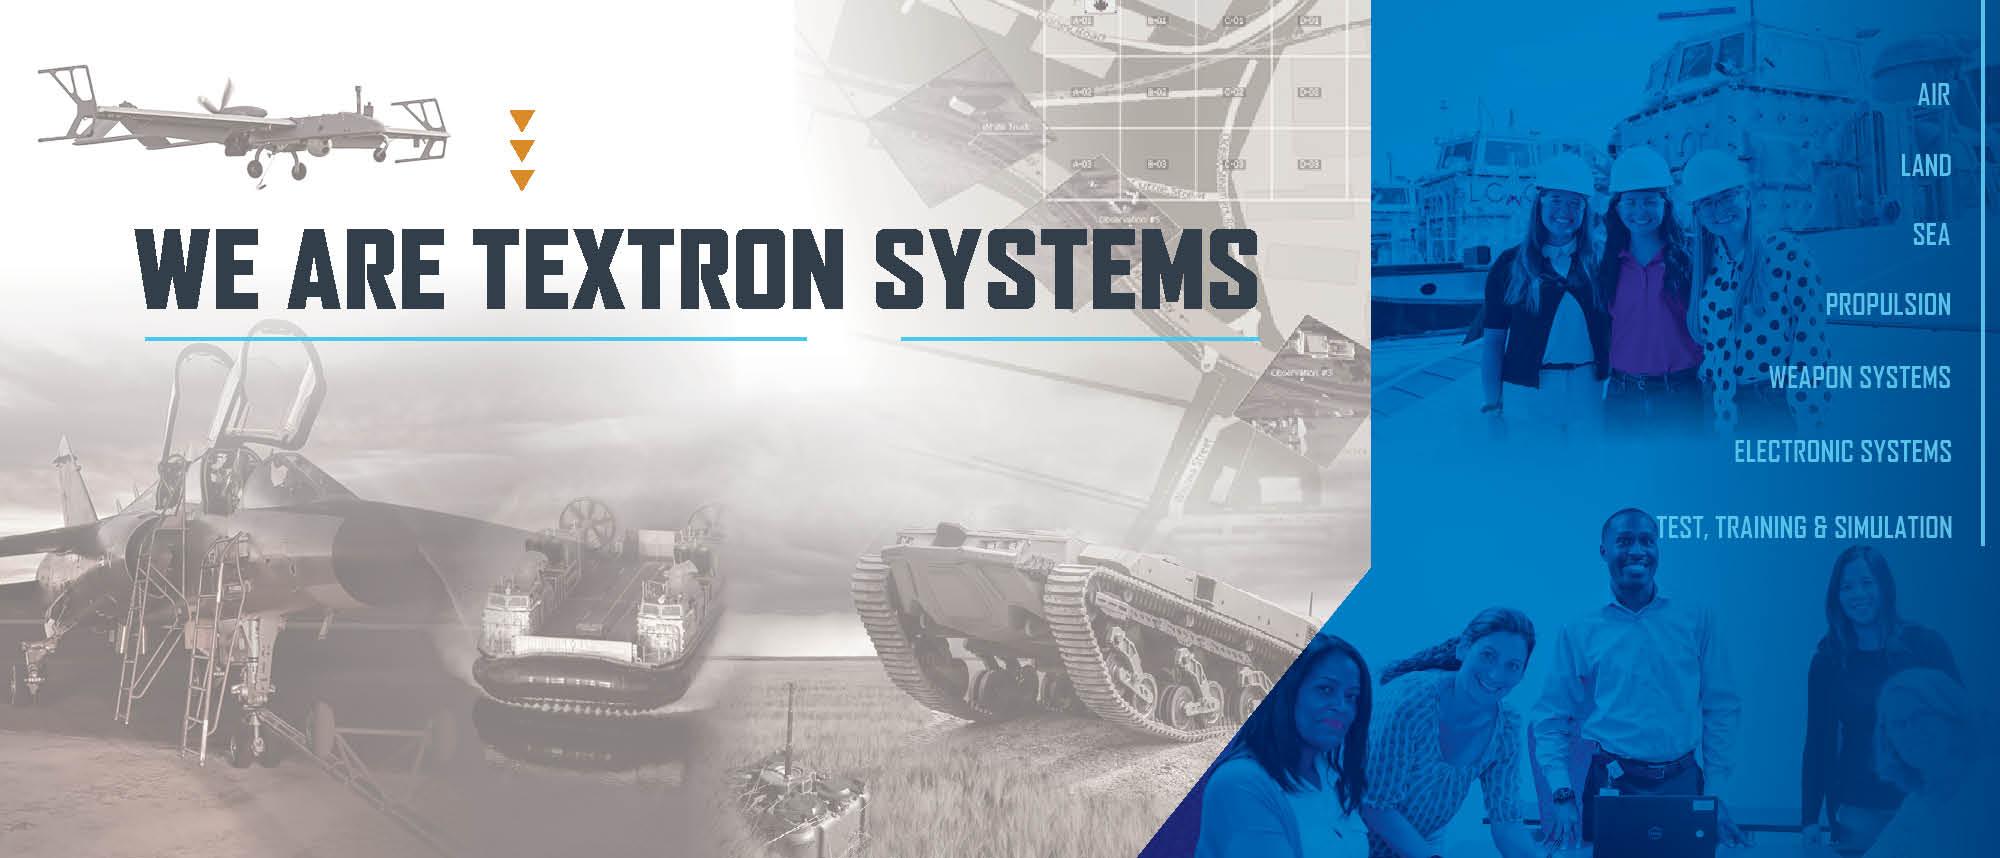 We are textron systems